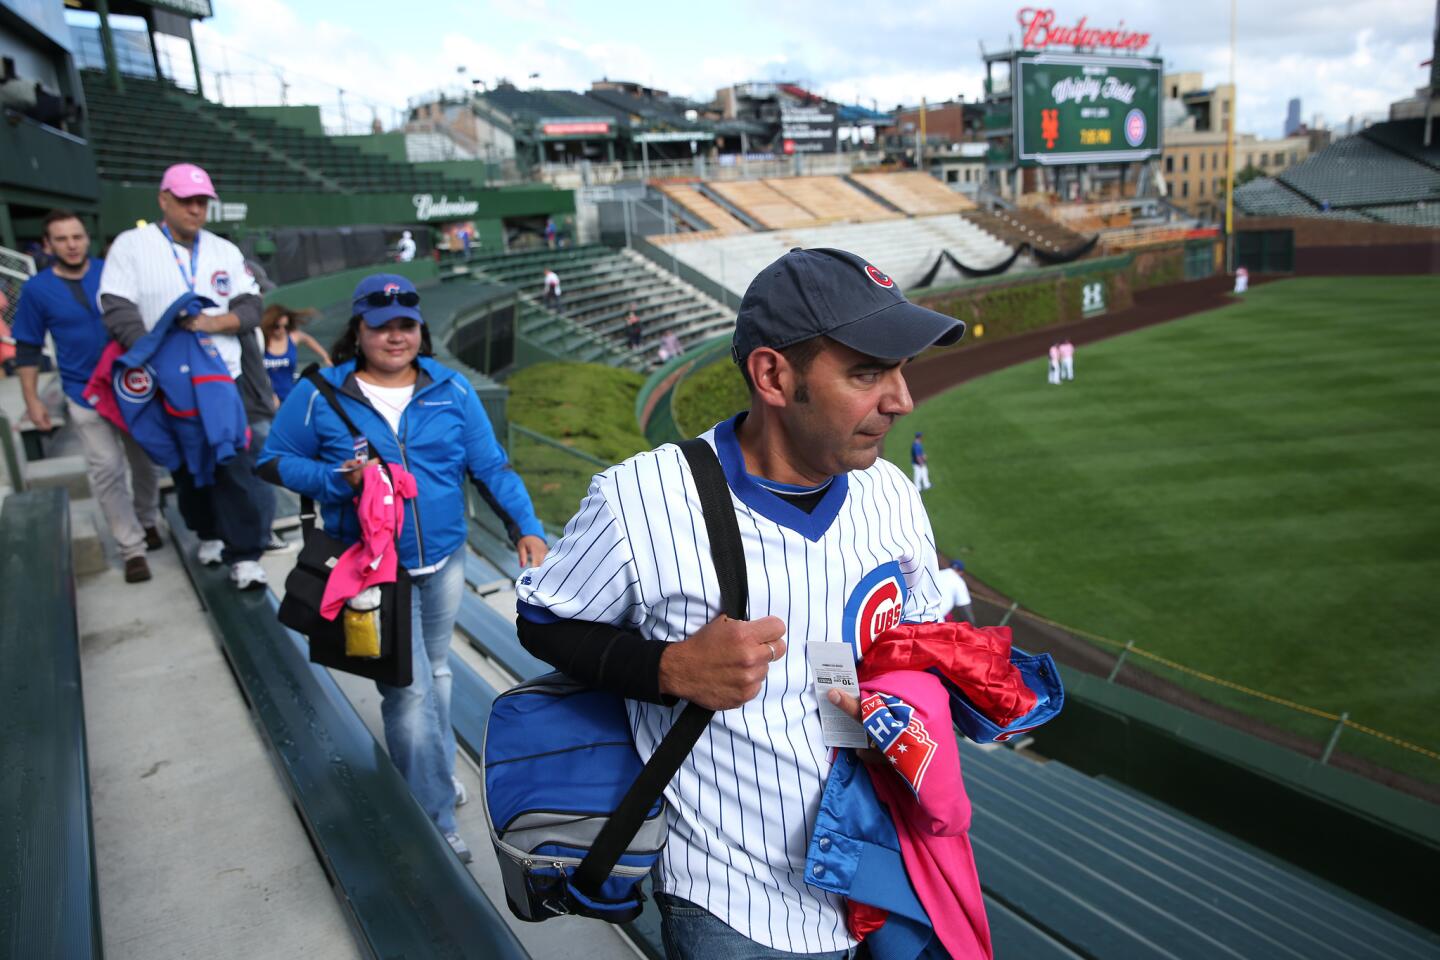 Fans at Wrigley Field